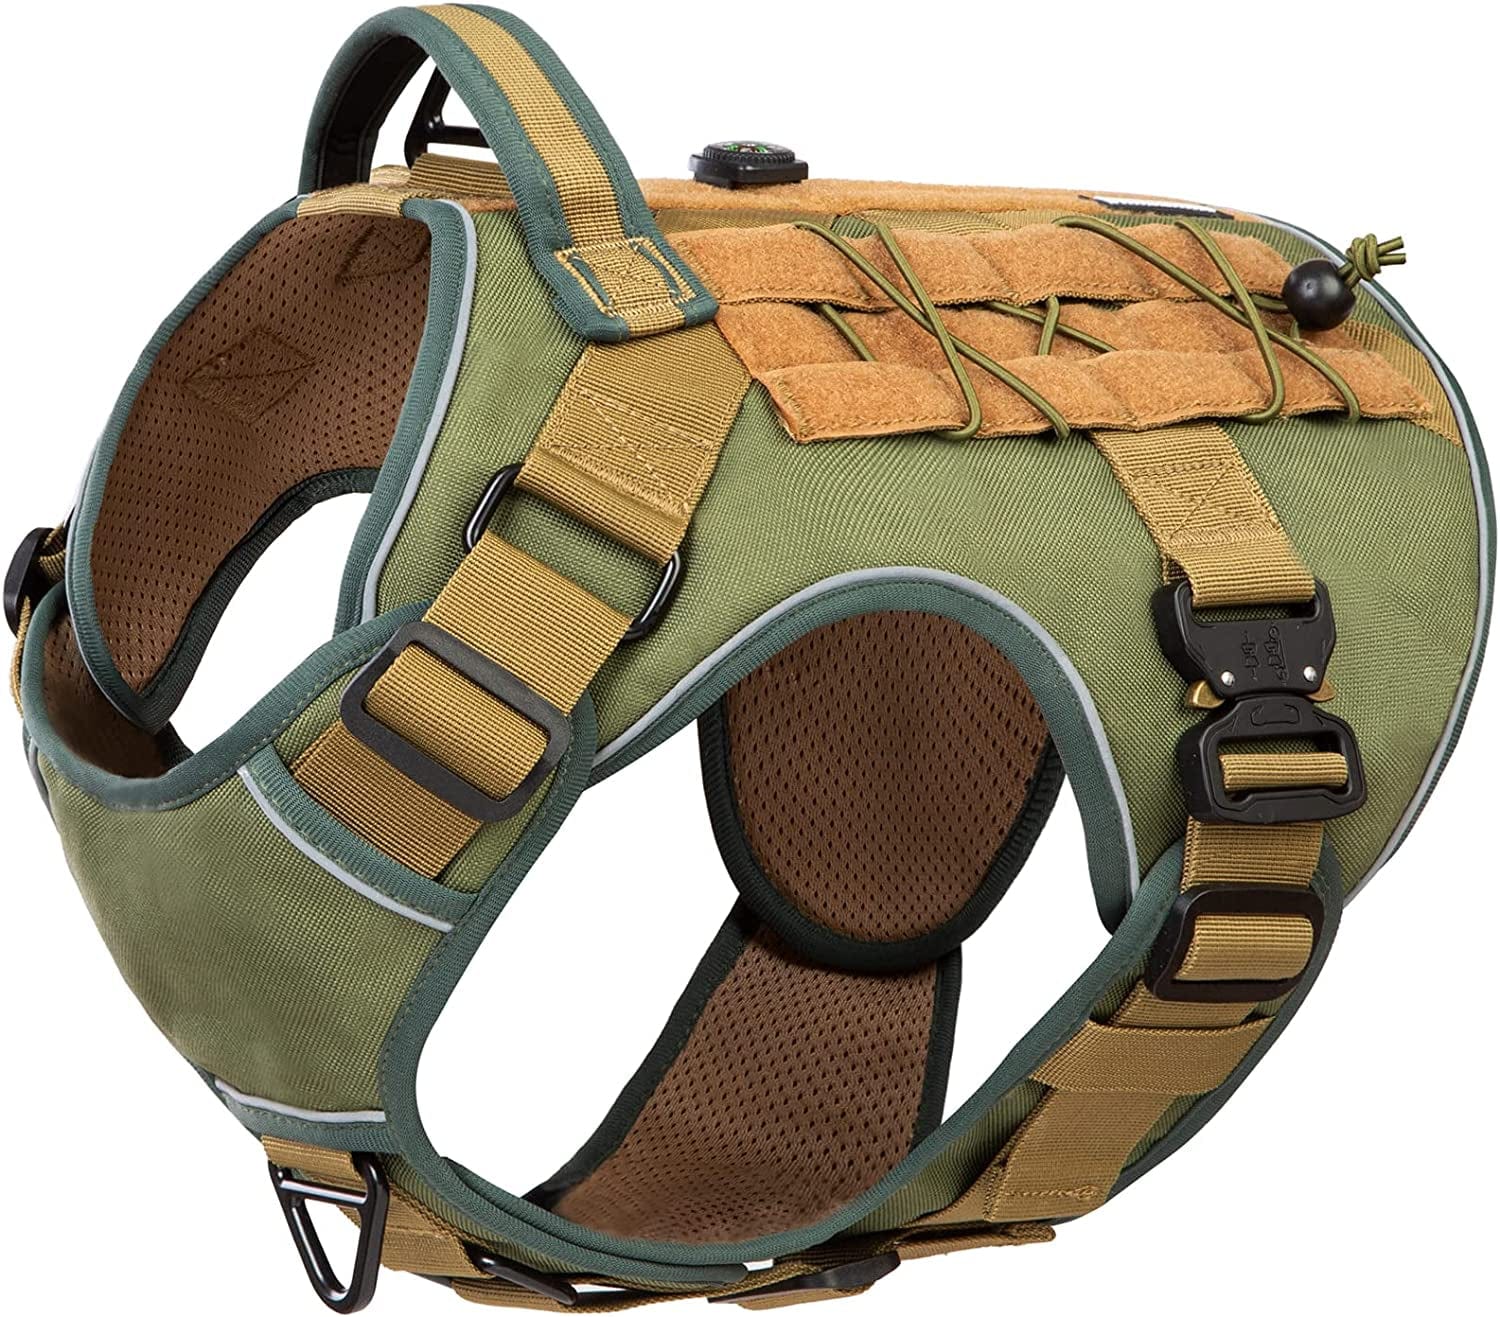 DNALLRINO Tactical Dog Harness for Large Medium Dogs, Heavy Duty Military Dog Harness with Handle, Adjustable No Pull Service Dog Harness with Molle & Loop Panels for Hiking Walking Training Animals & Pet Supplies > Pet Supplies > Dog Supplies > Dog Apparel Dnallrino Green L (Neck: 19" - 27", Chest: 28.5"-37") 